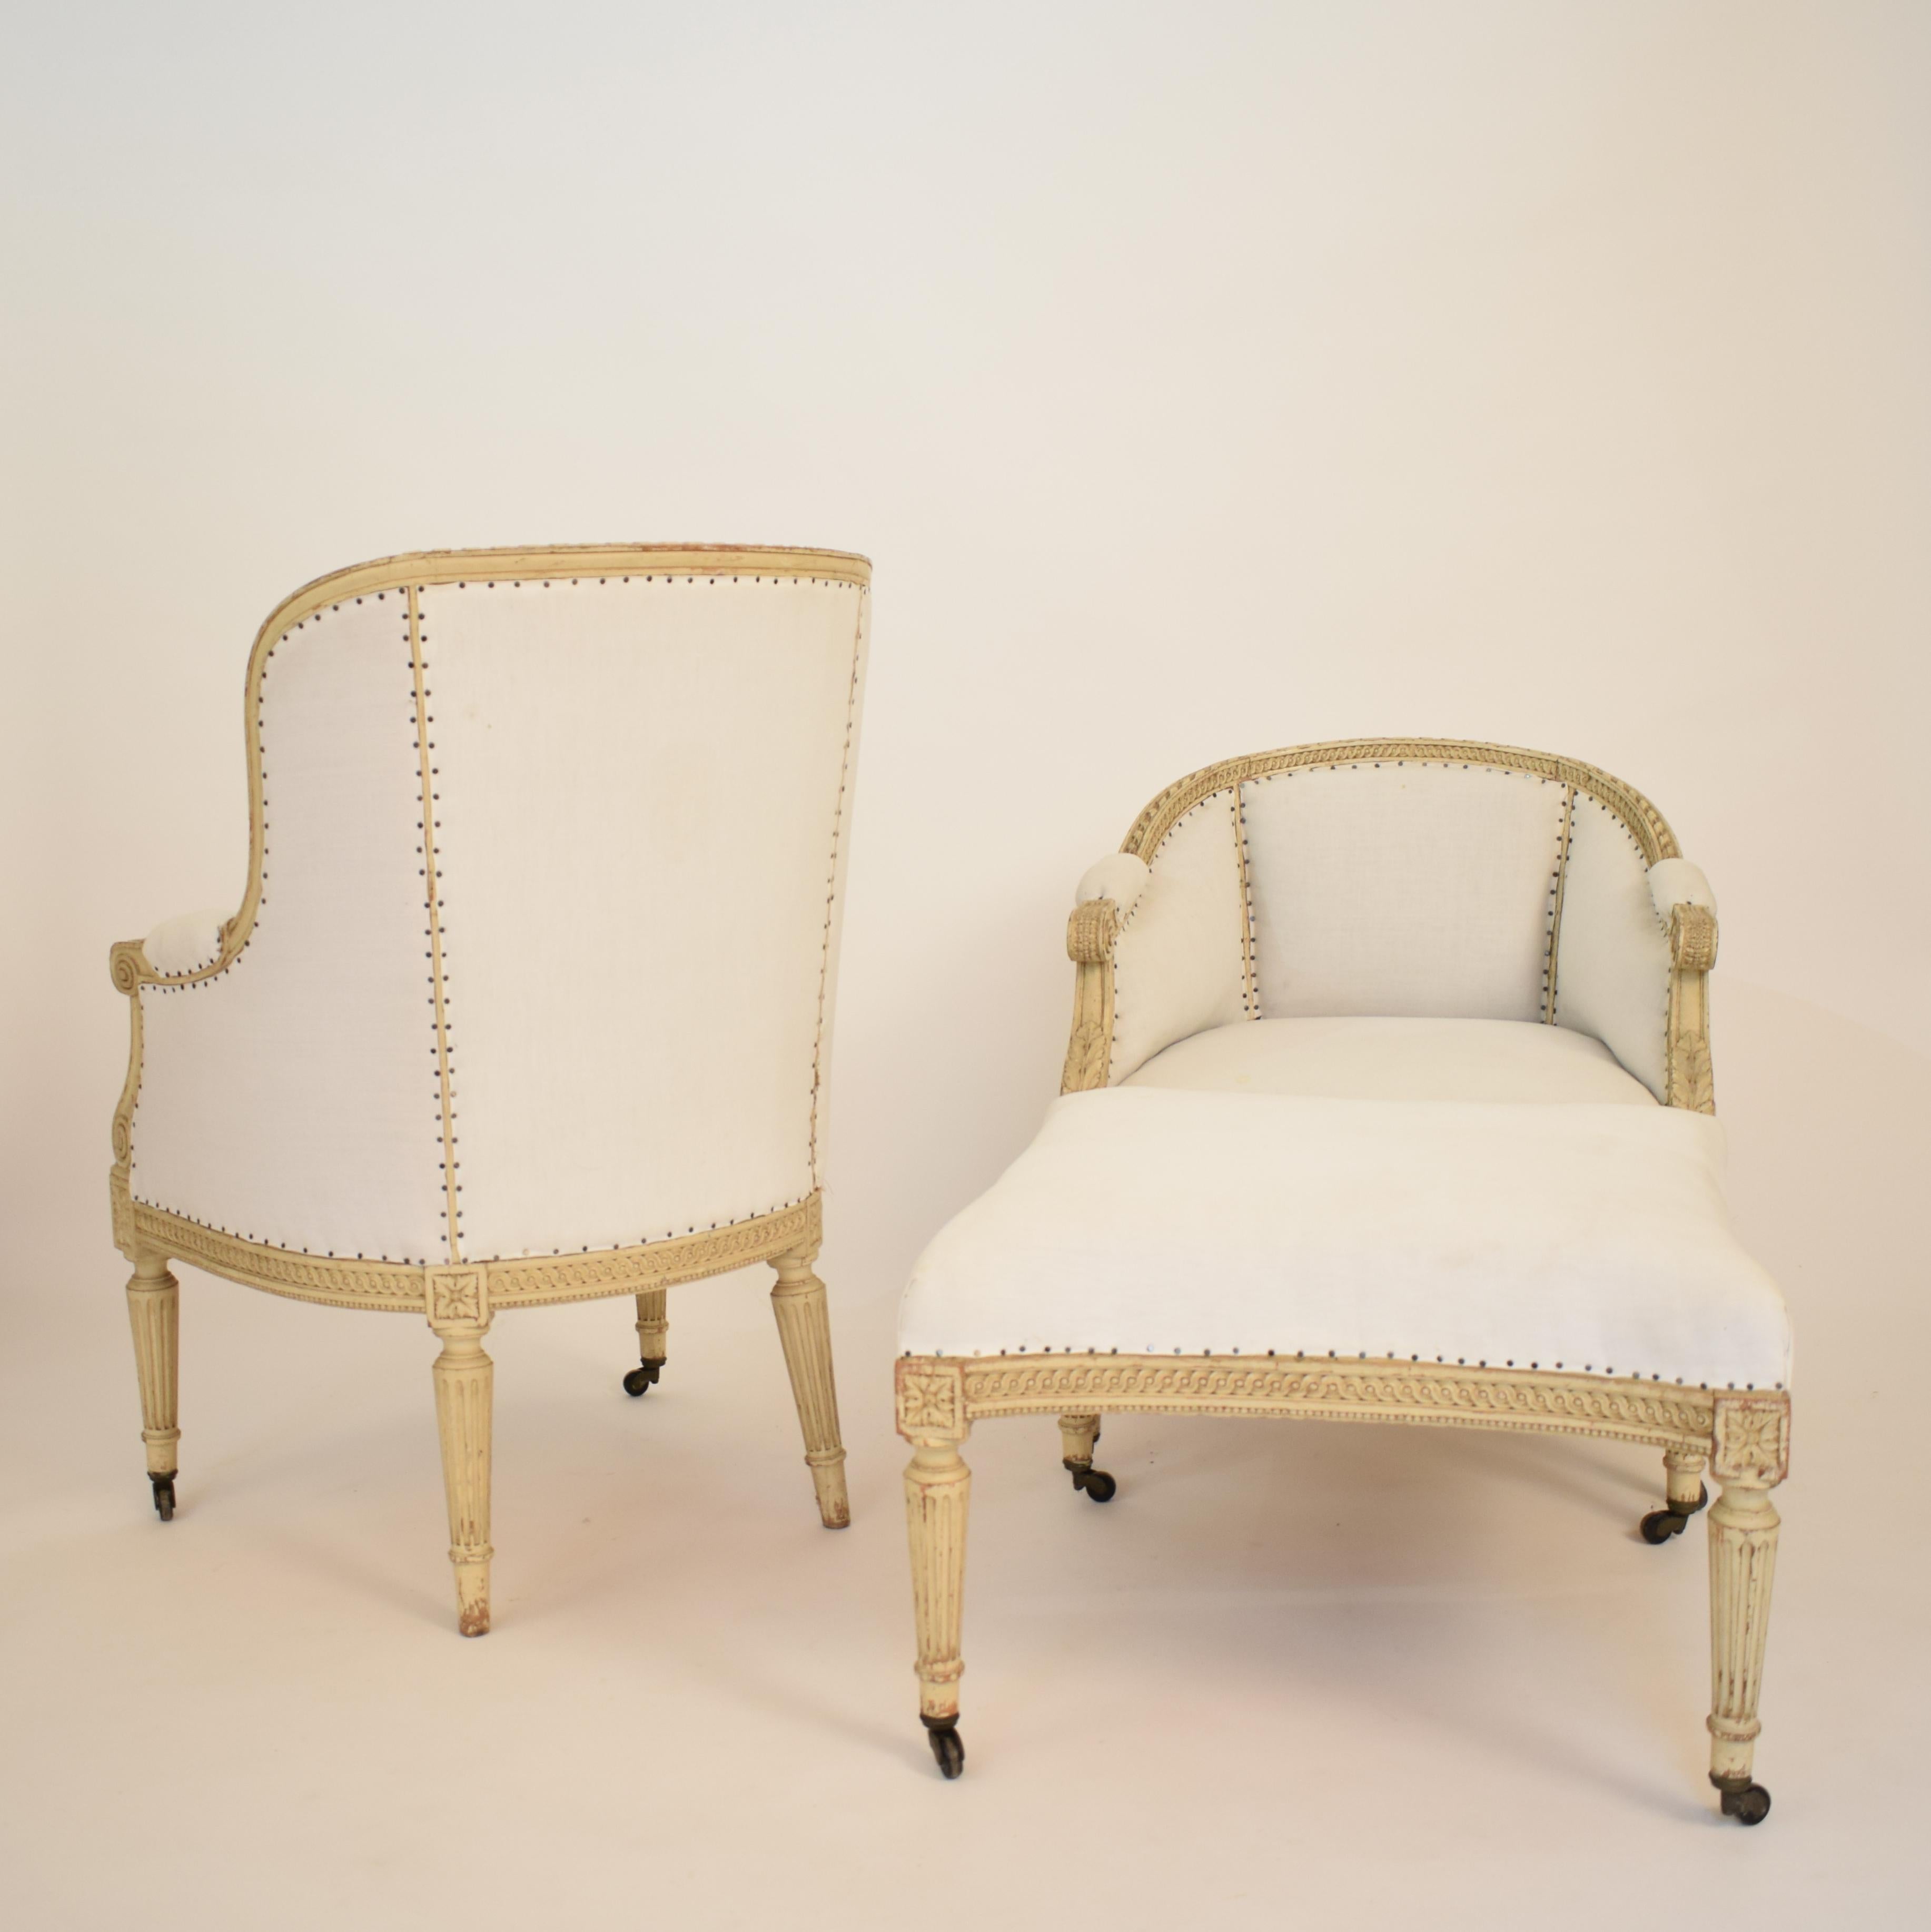 1850s Louis XVI Style Duchesse Brisee in Original Lacquer and Re-Upholstered 5